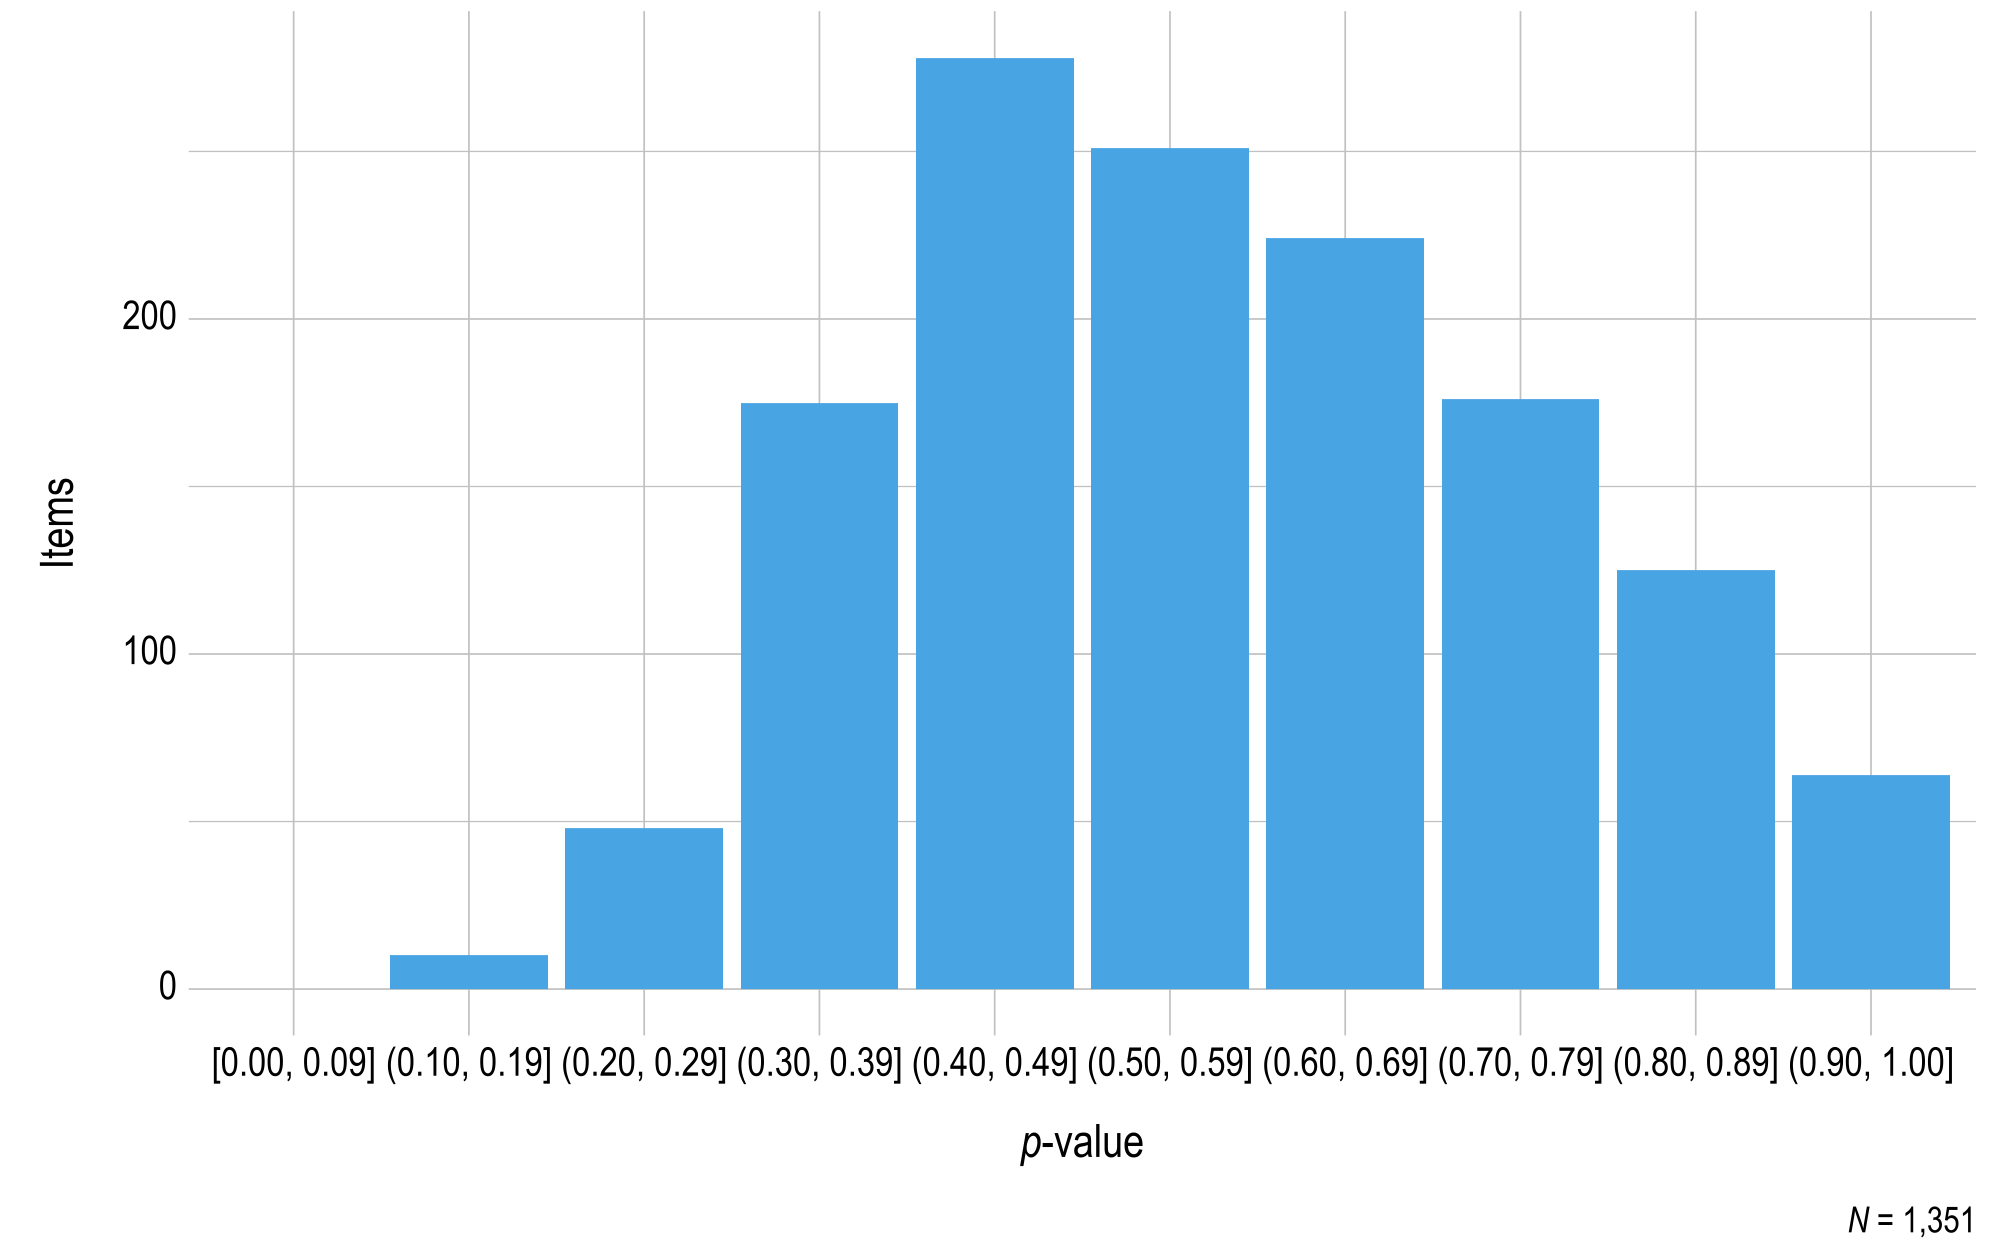 This figure contains a histogram displaying p-value on the x-axis and the number of mathematics operational items on the y-axis.